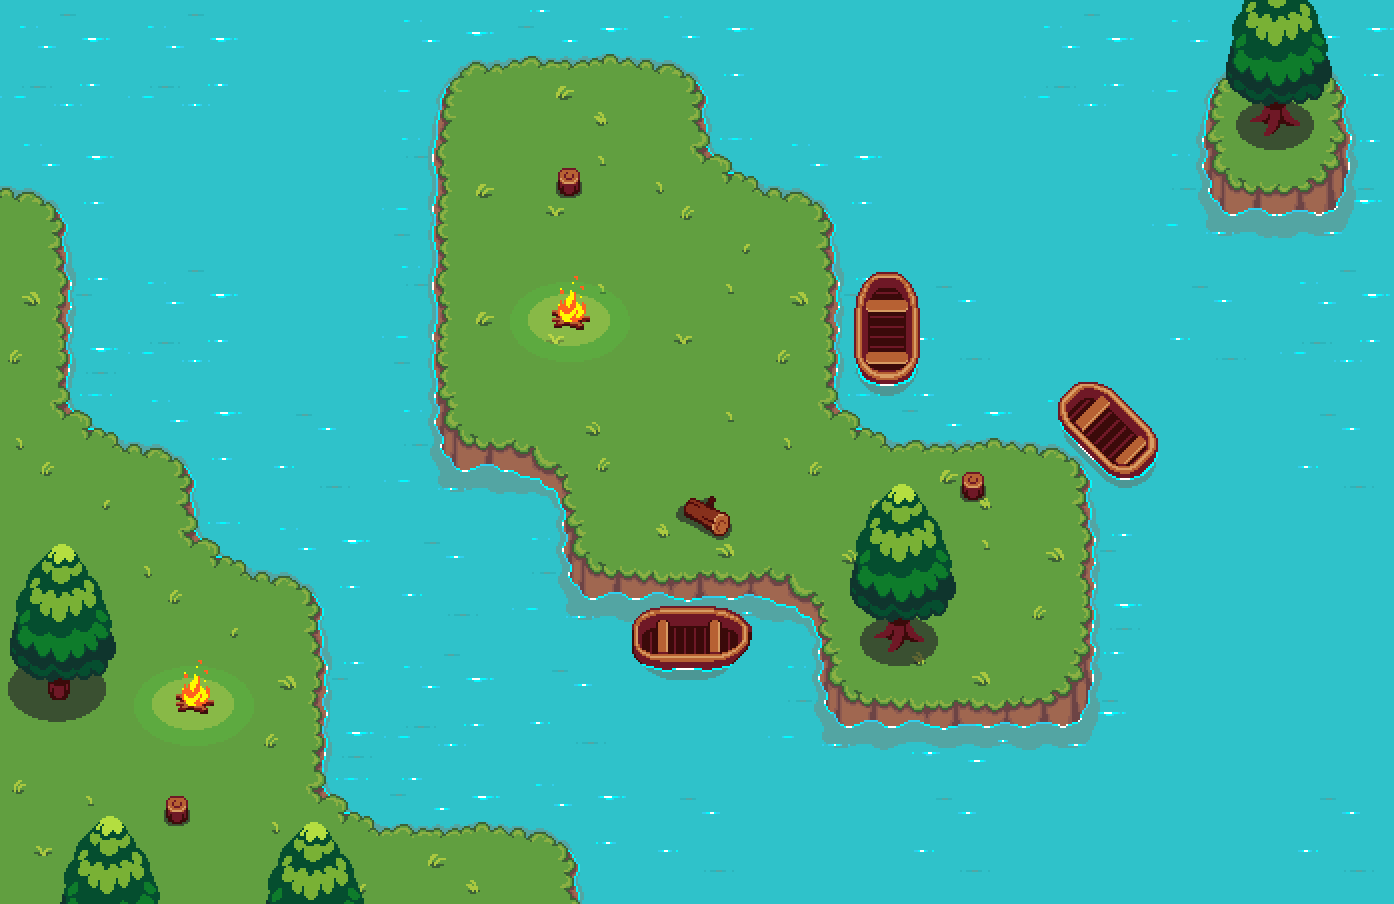 Adding a small animated boat. - RPG Ground Tileset + Animated